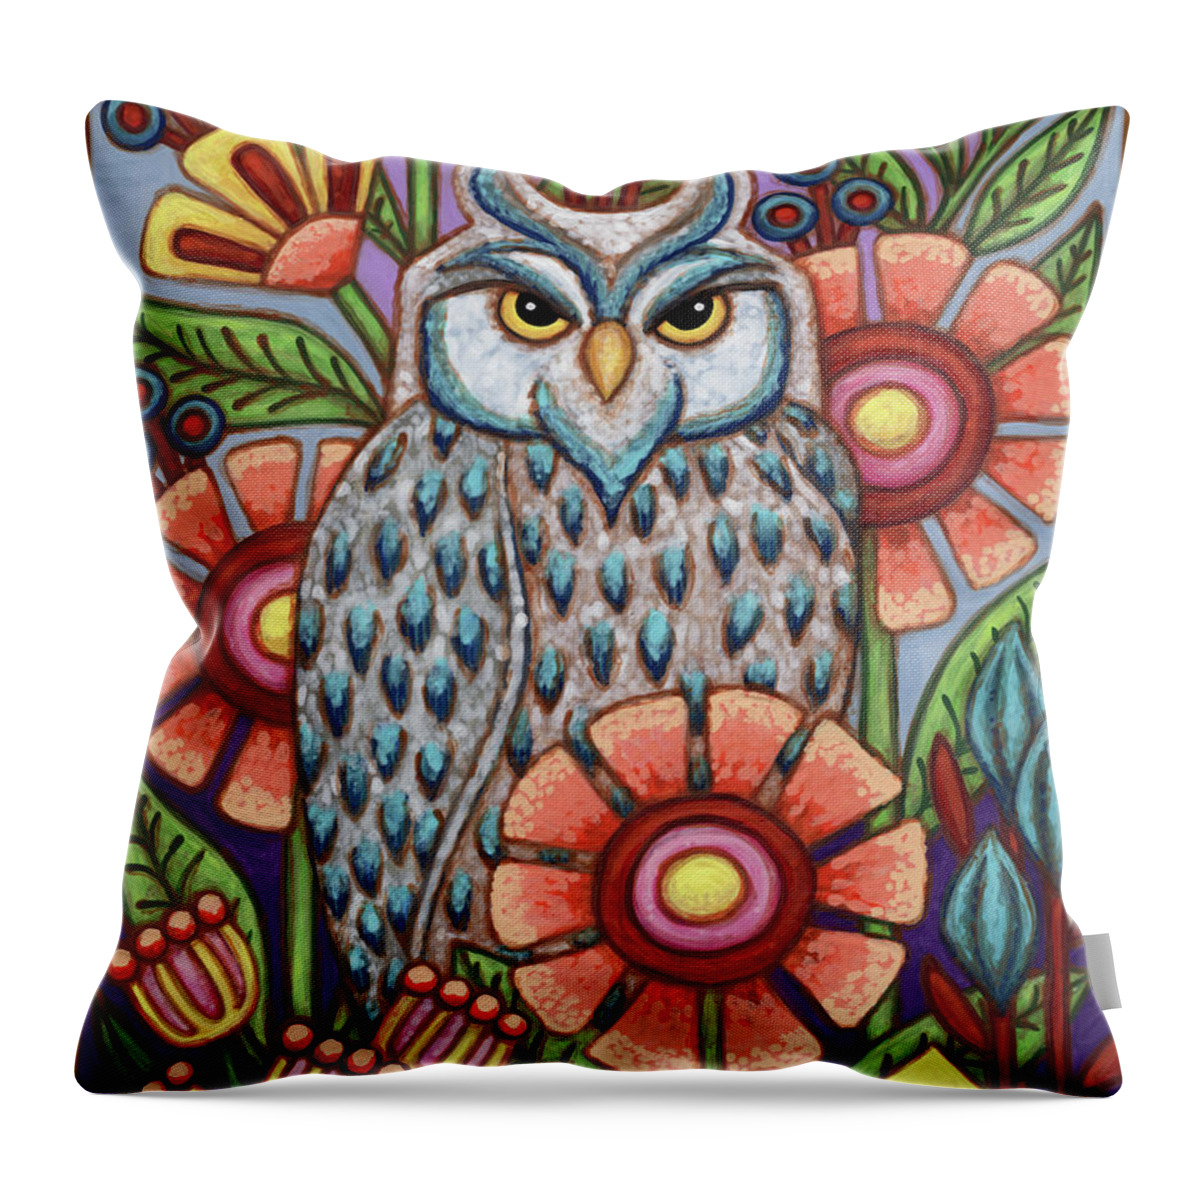 Bird Throw Pillow featuring the painting The Owl Hour by Amy E Fraser